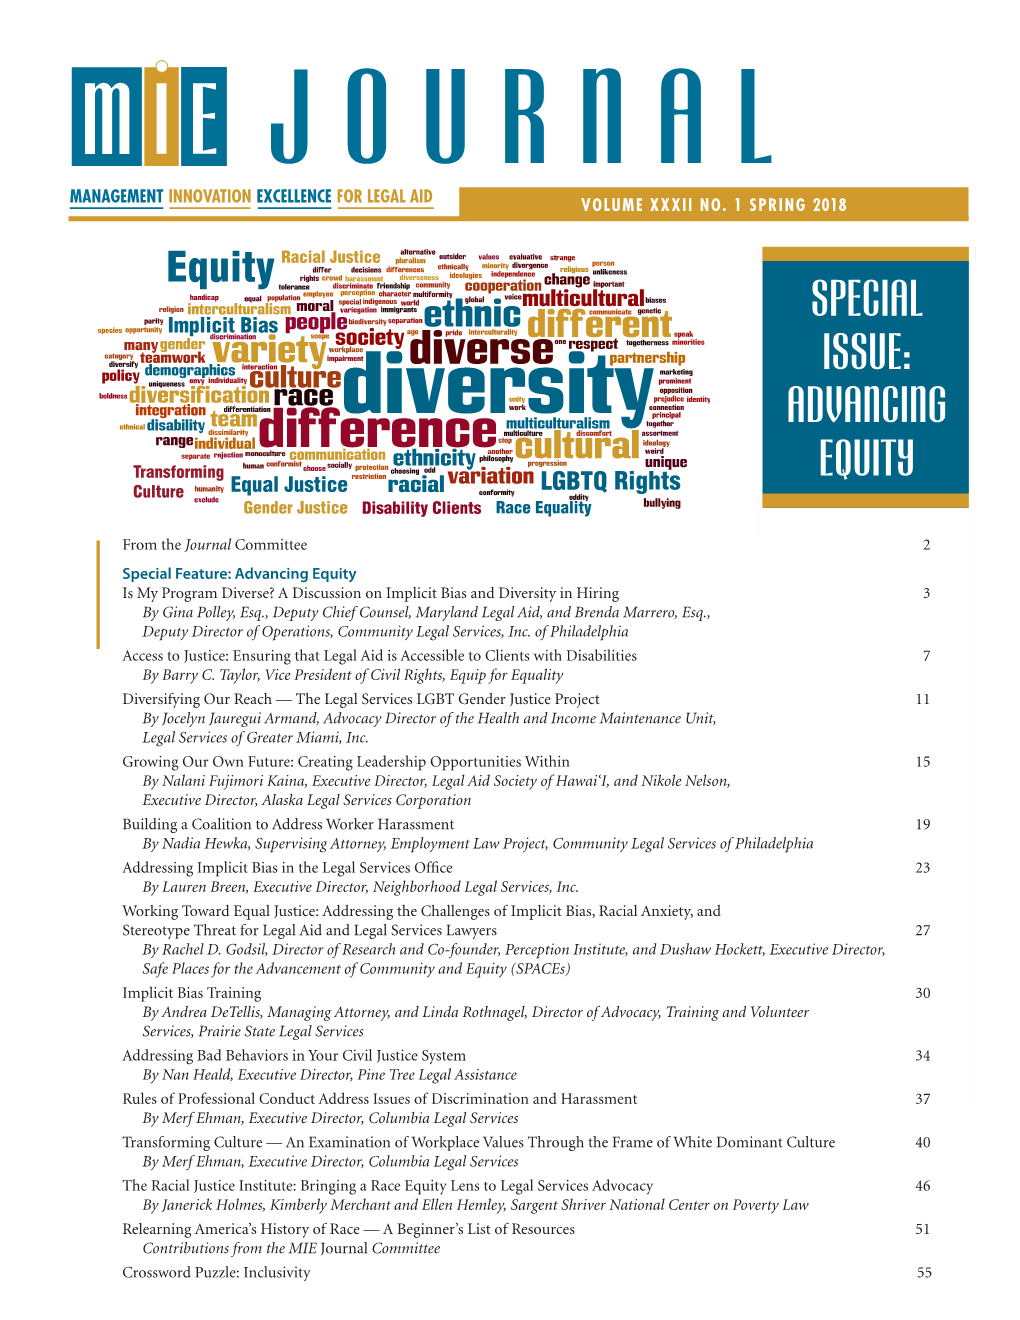 Special Issue: Advancing Equity